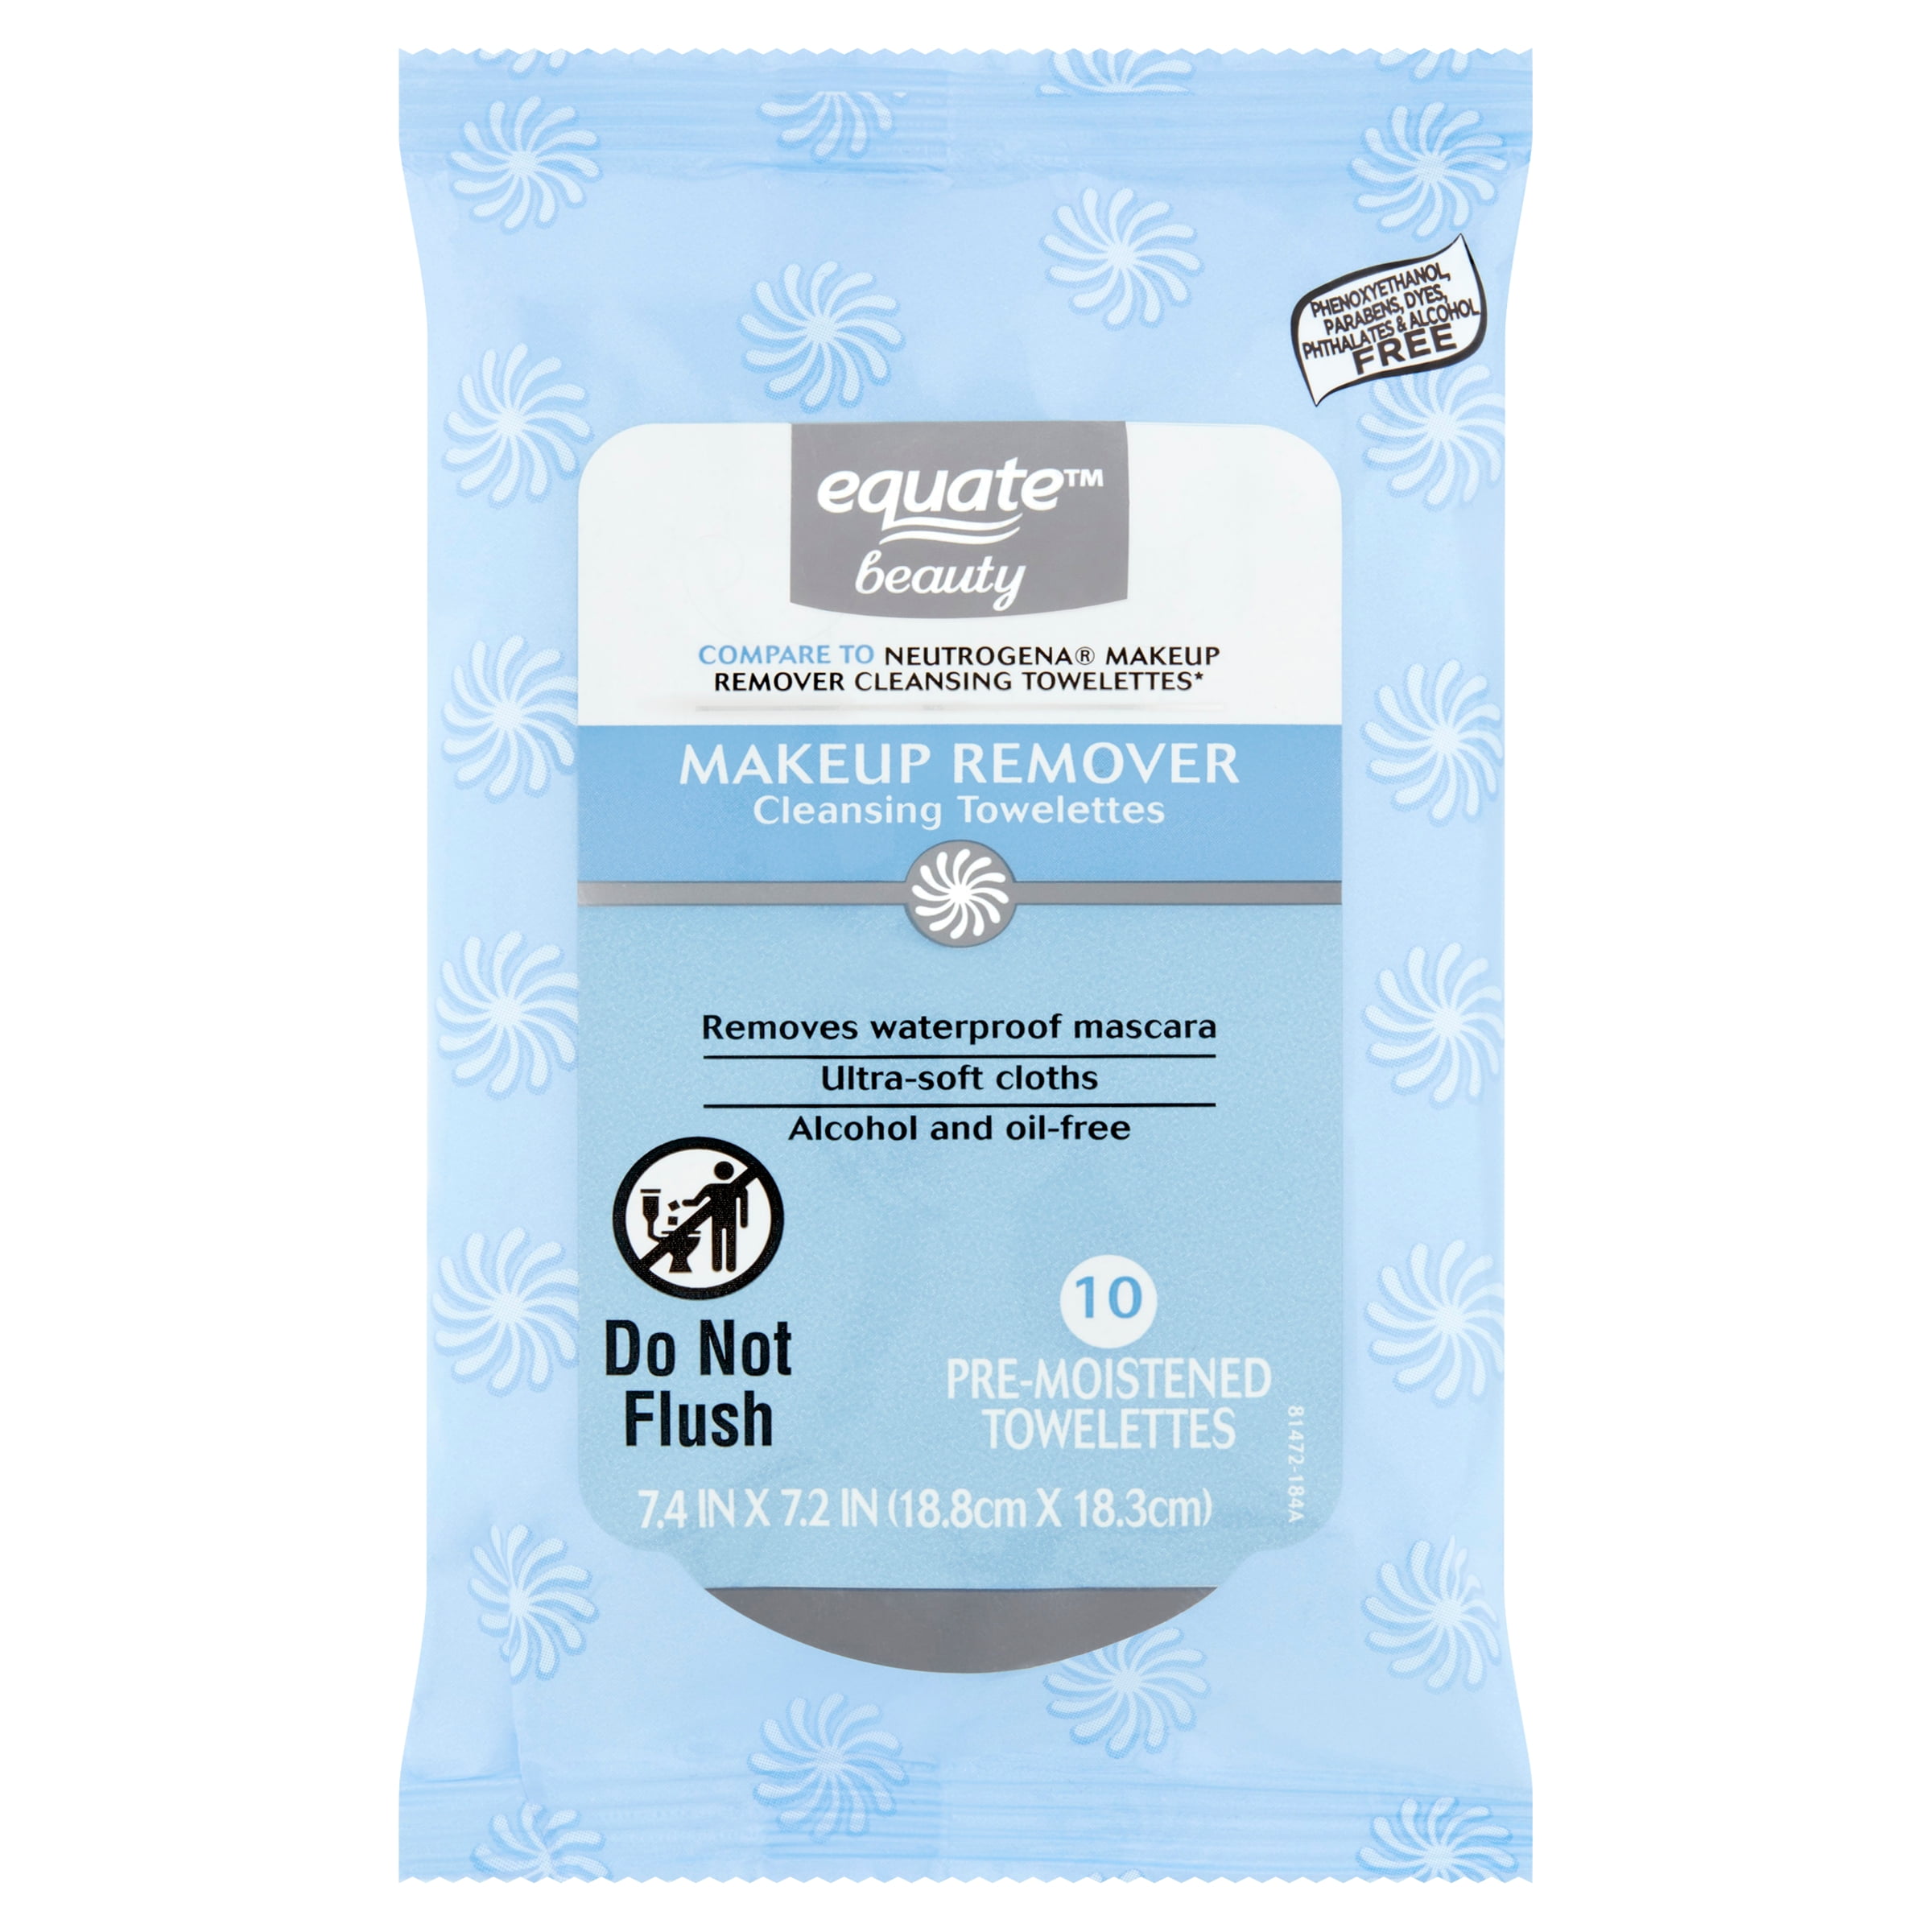 Equate Makeup Remover Facial Wipes, 10 Total Wipes